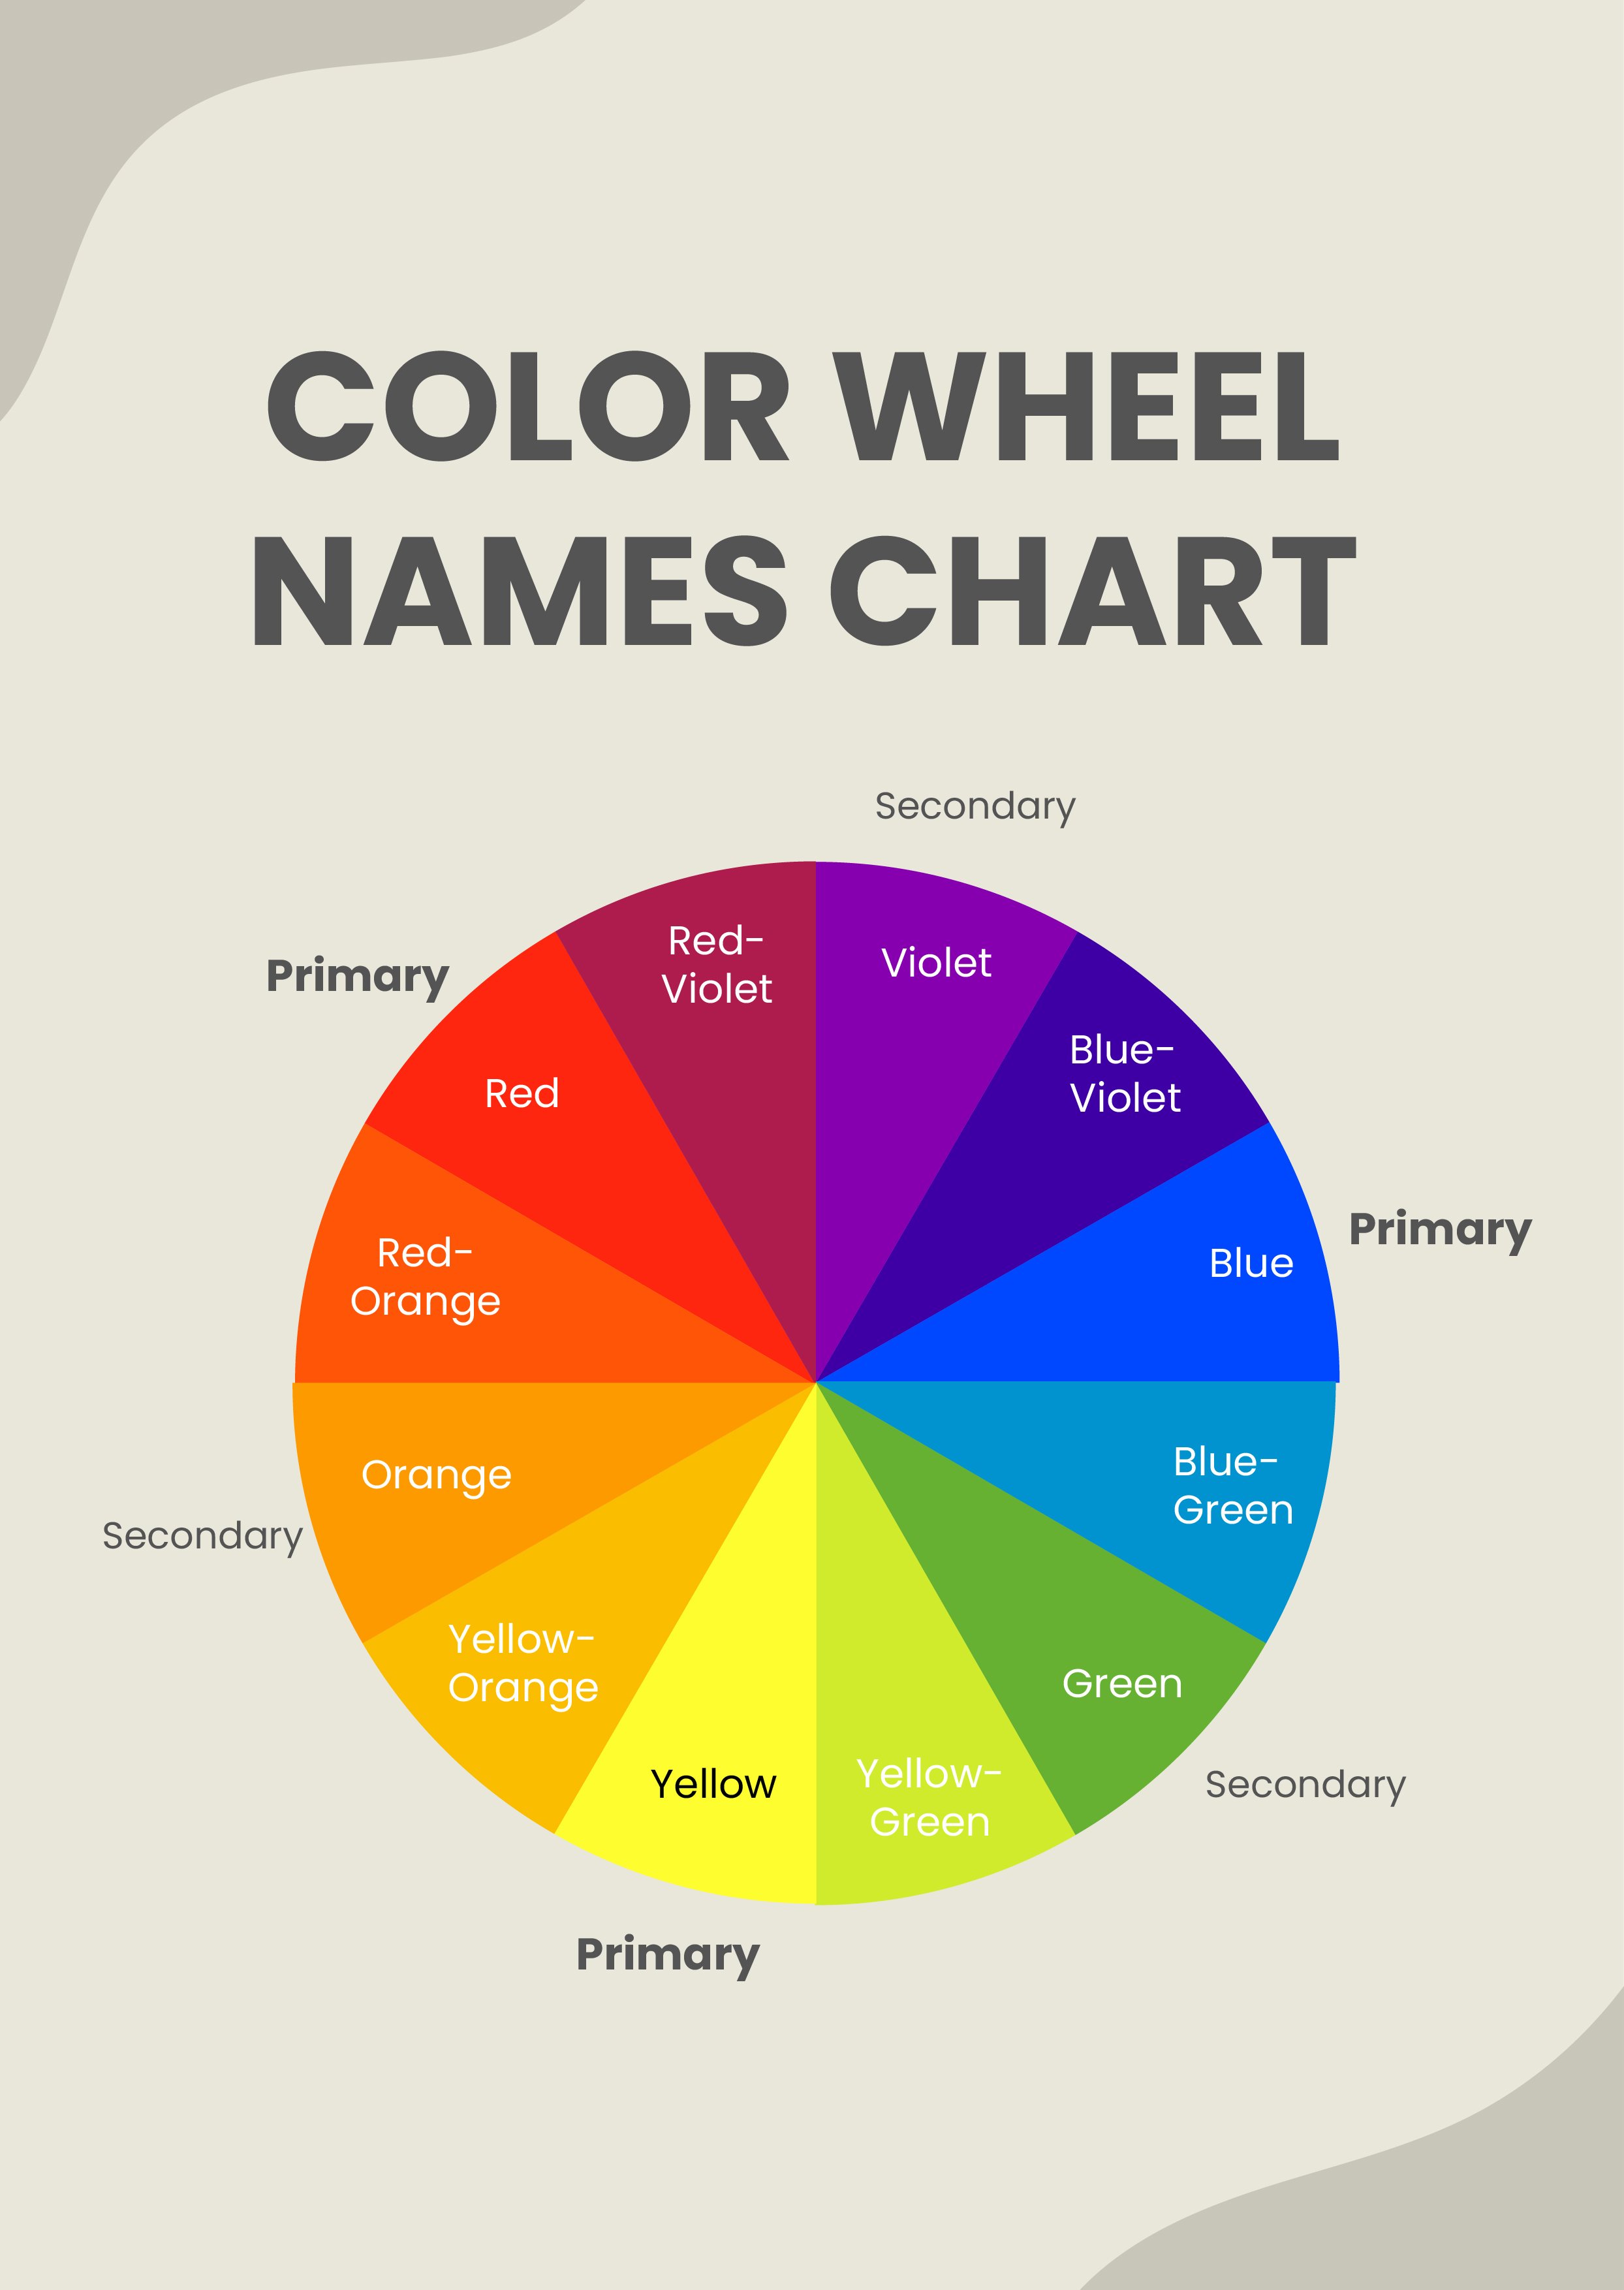 Free Color Wheel Names Chart - Download in PDF, Illustrator